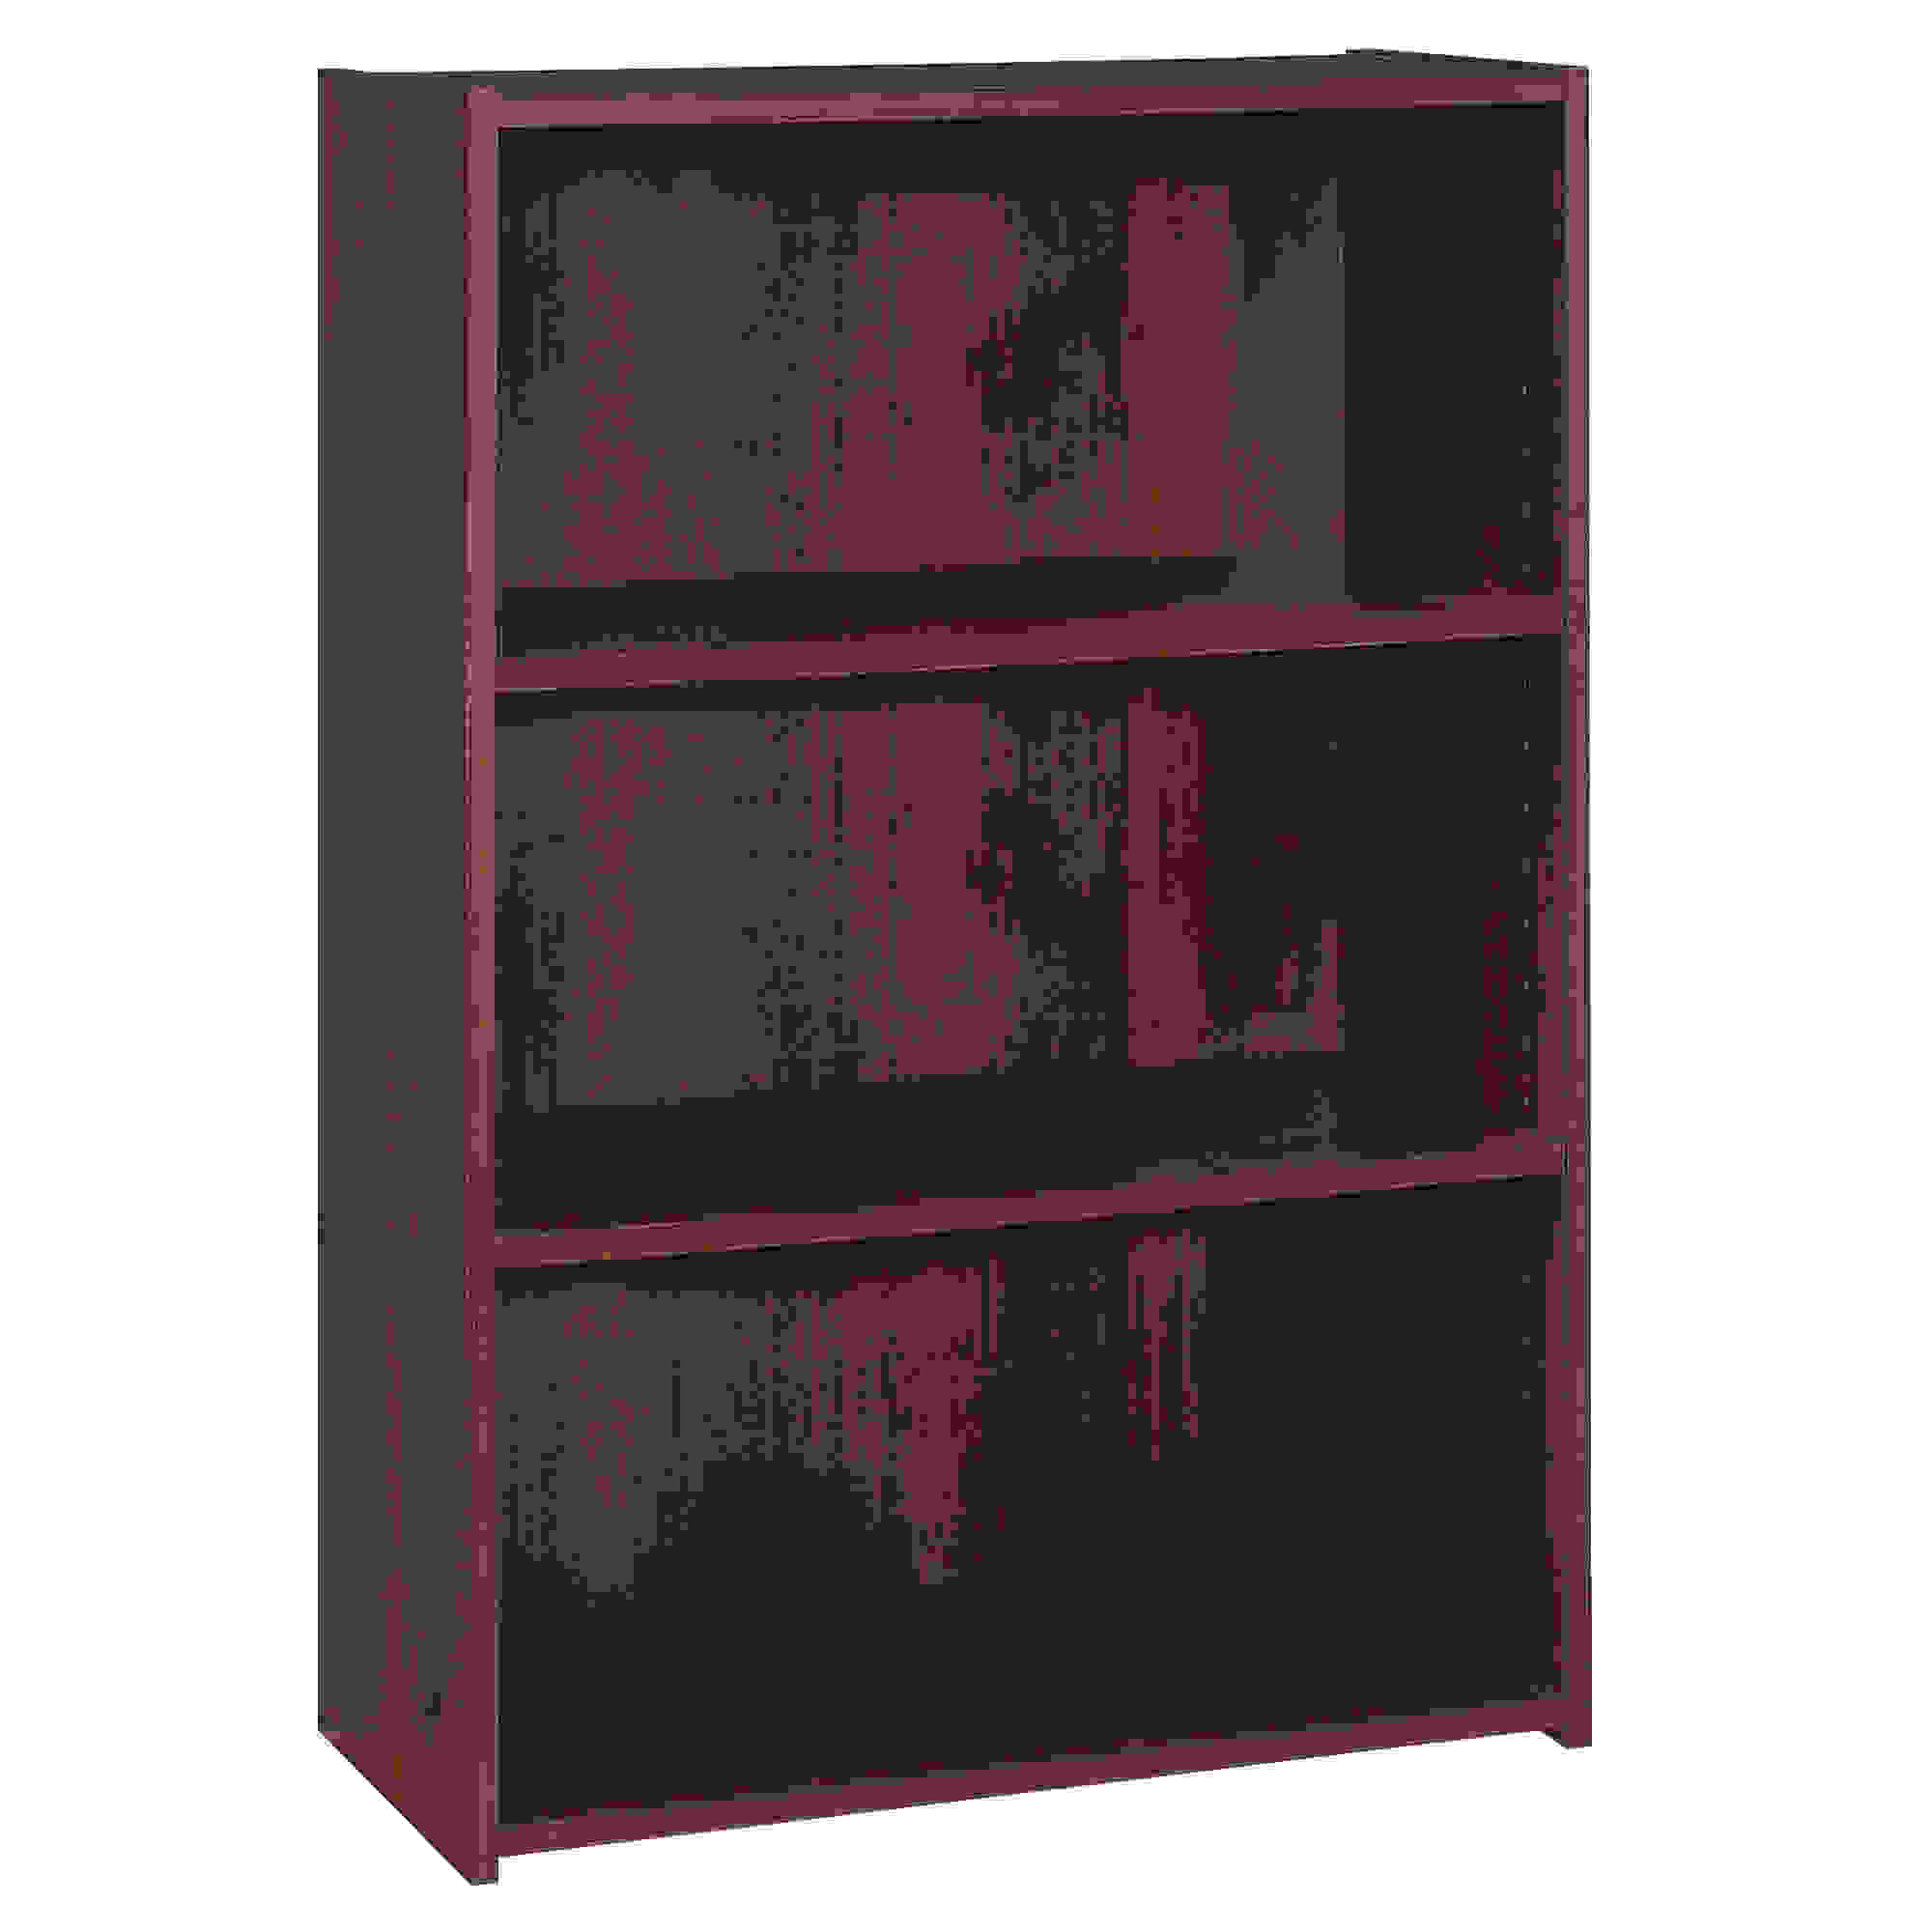 BOOKCASE - 36"H / CHERRY WITH 3 SHELVES